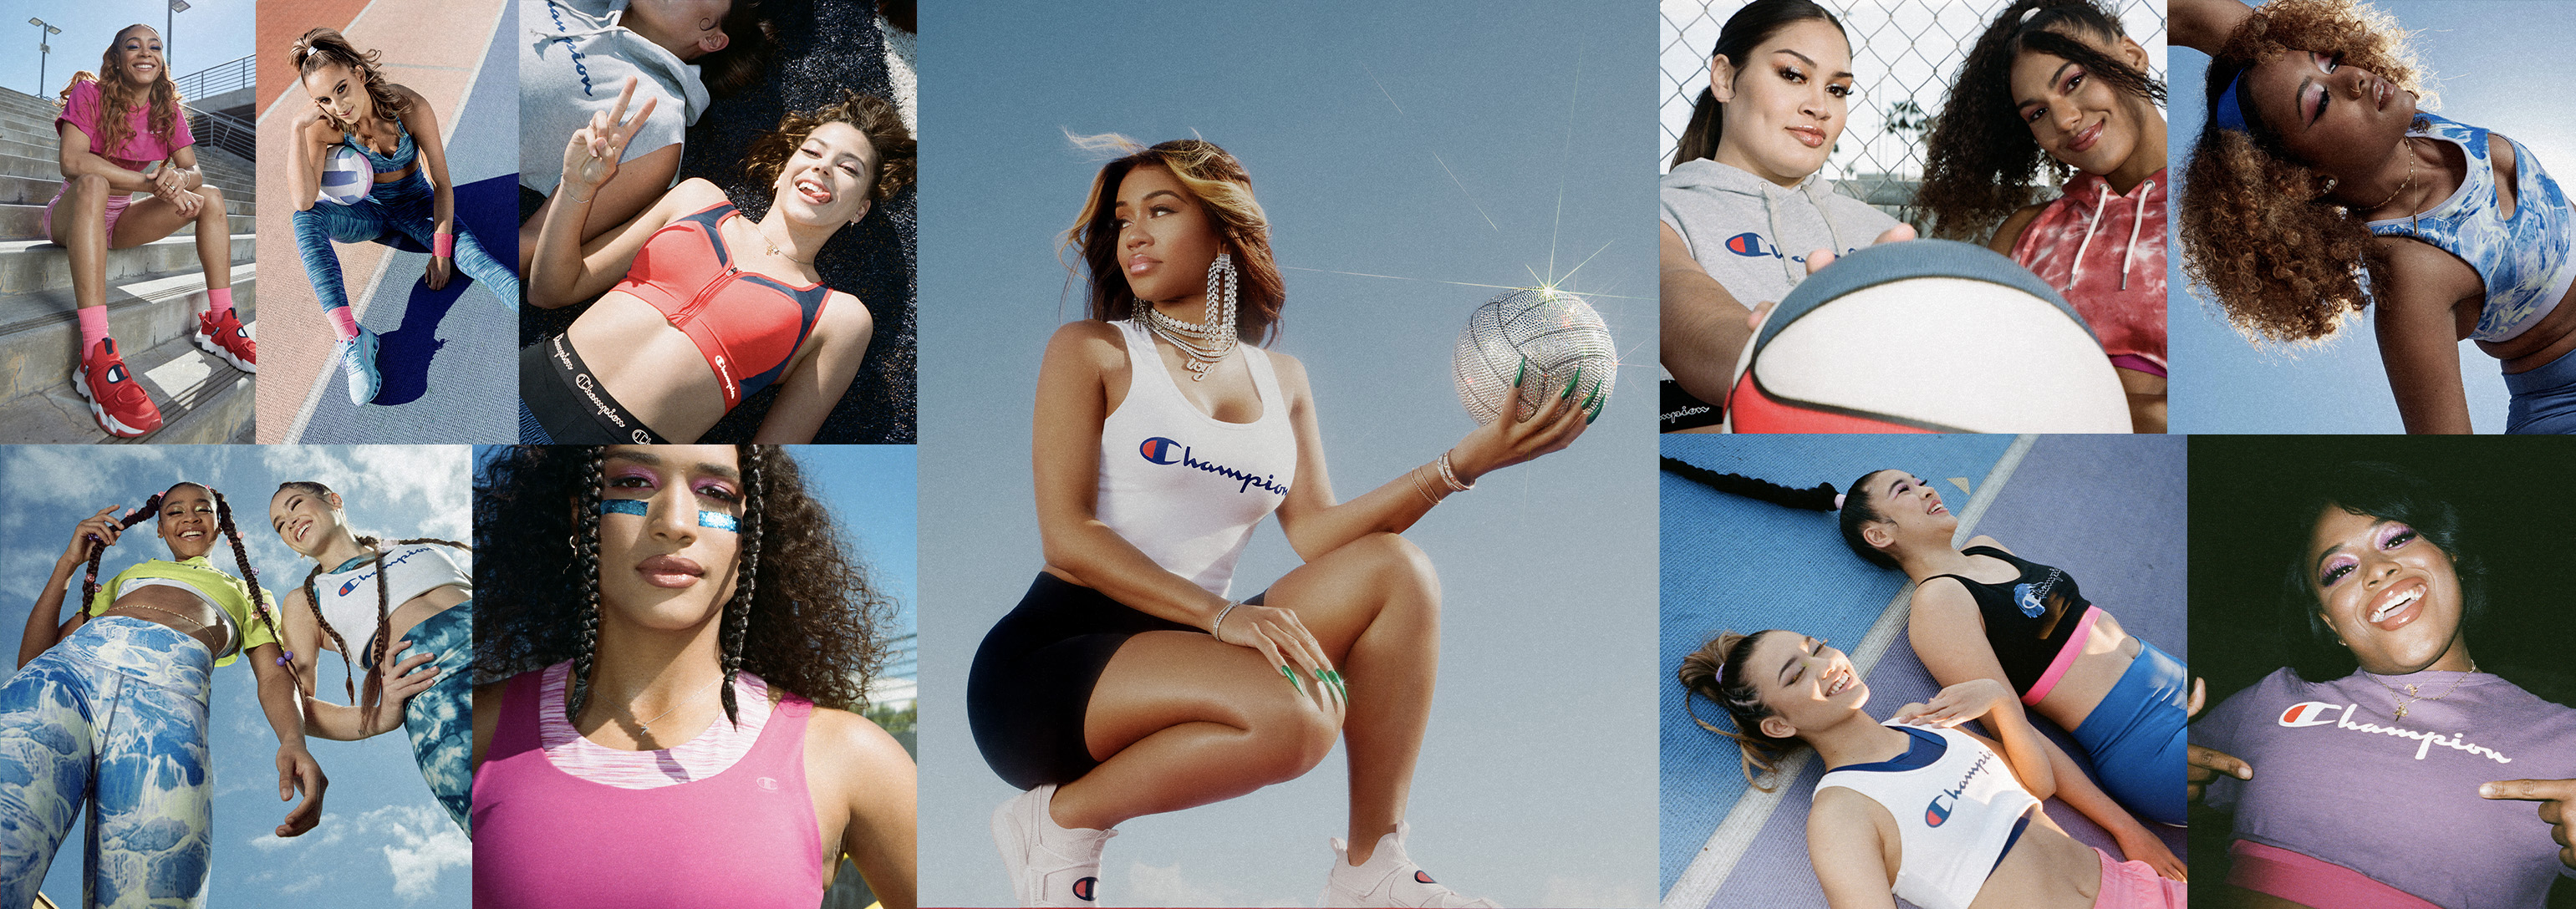 Champion® Athleticwear Gives Women the Confidence to Play By Their Own  Rules with New “Get it Girl” Sportswear Campaign